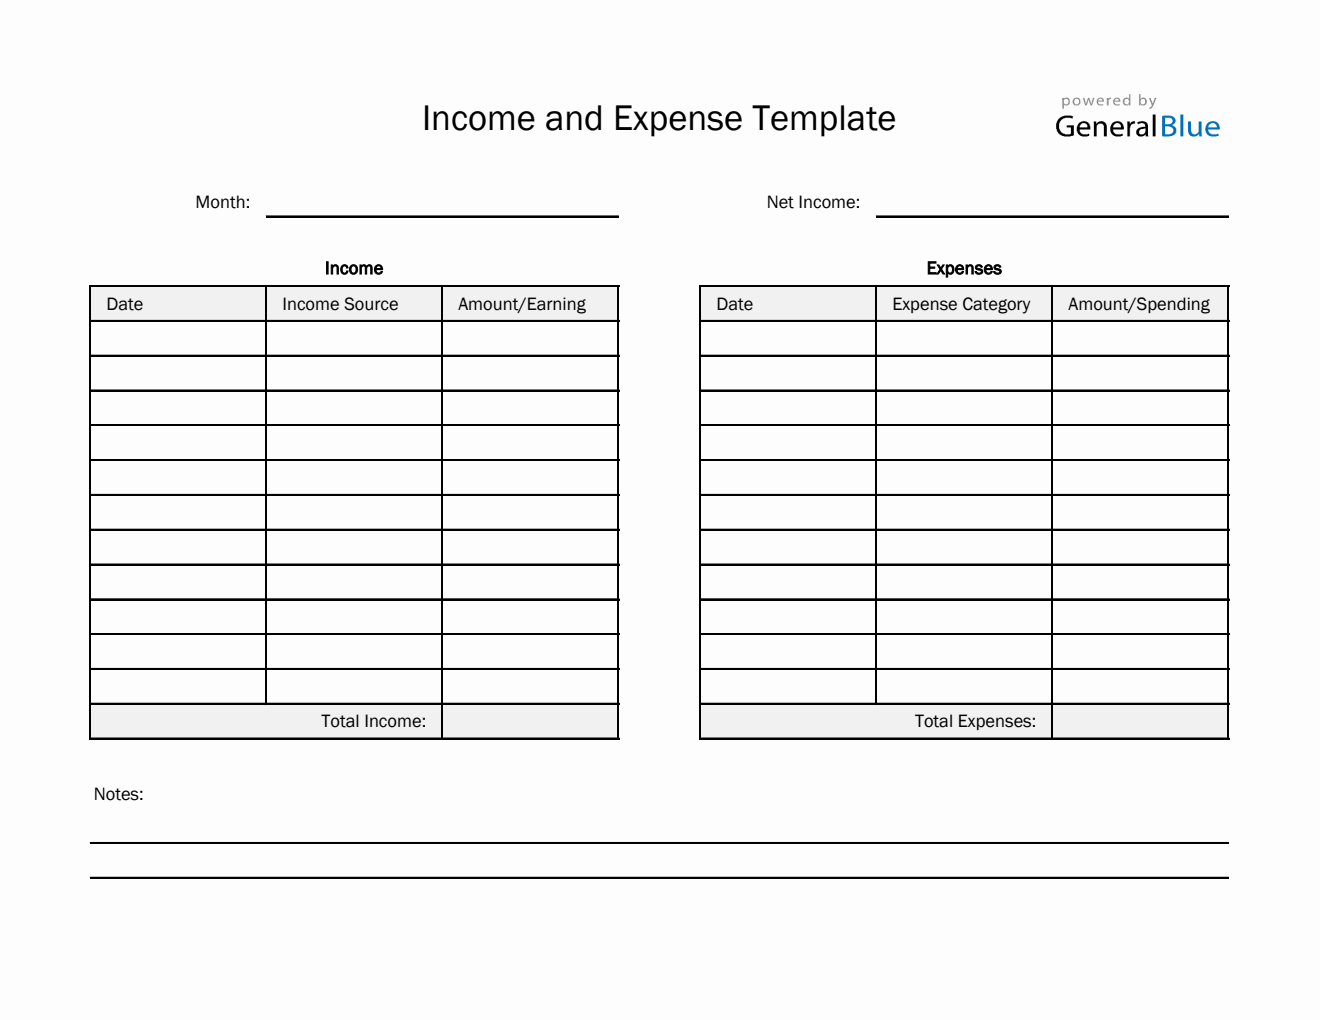 Printable Income and Expense Template in Excel